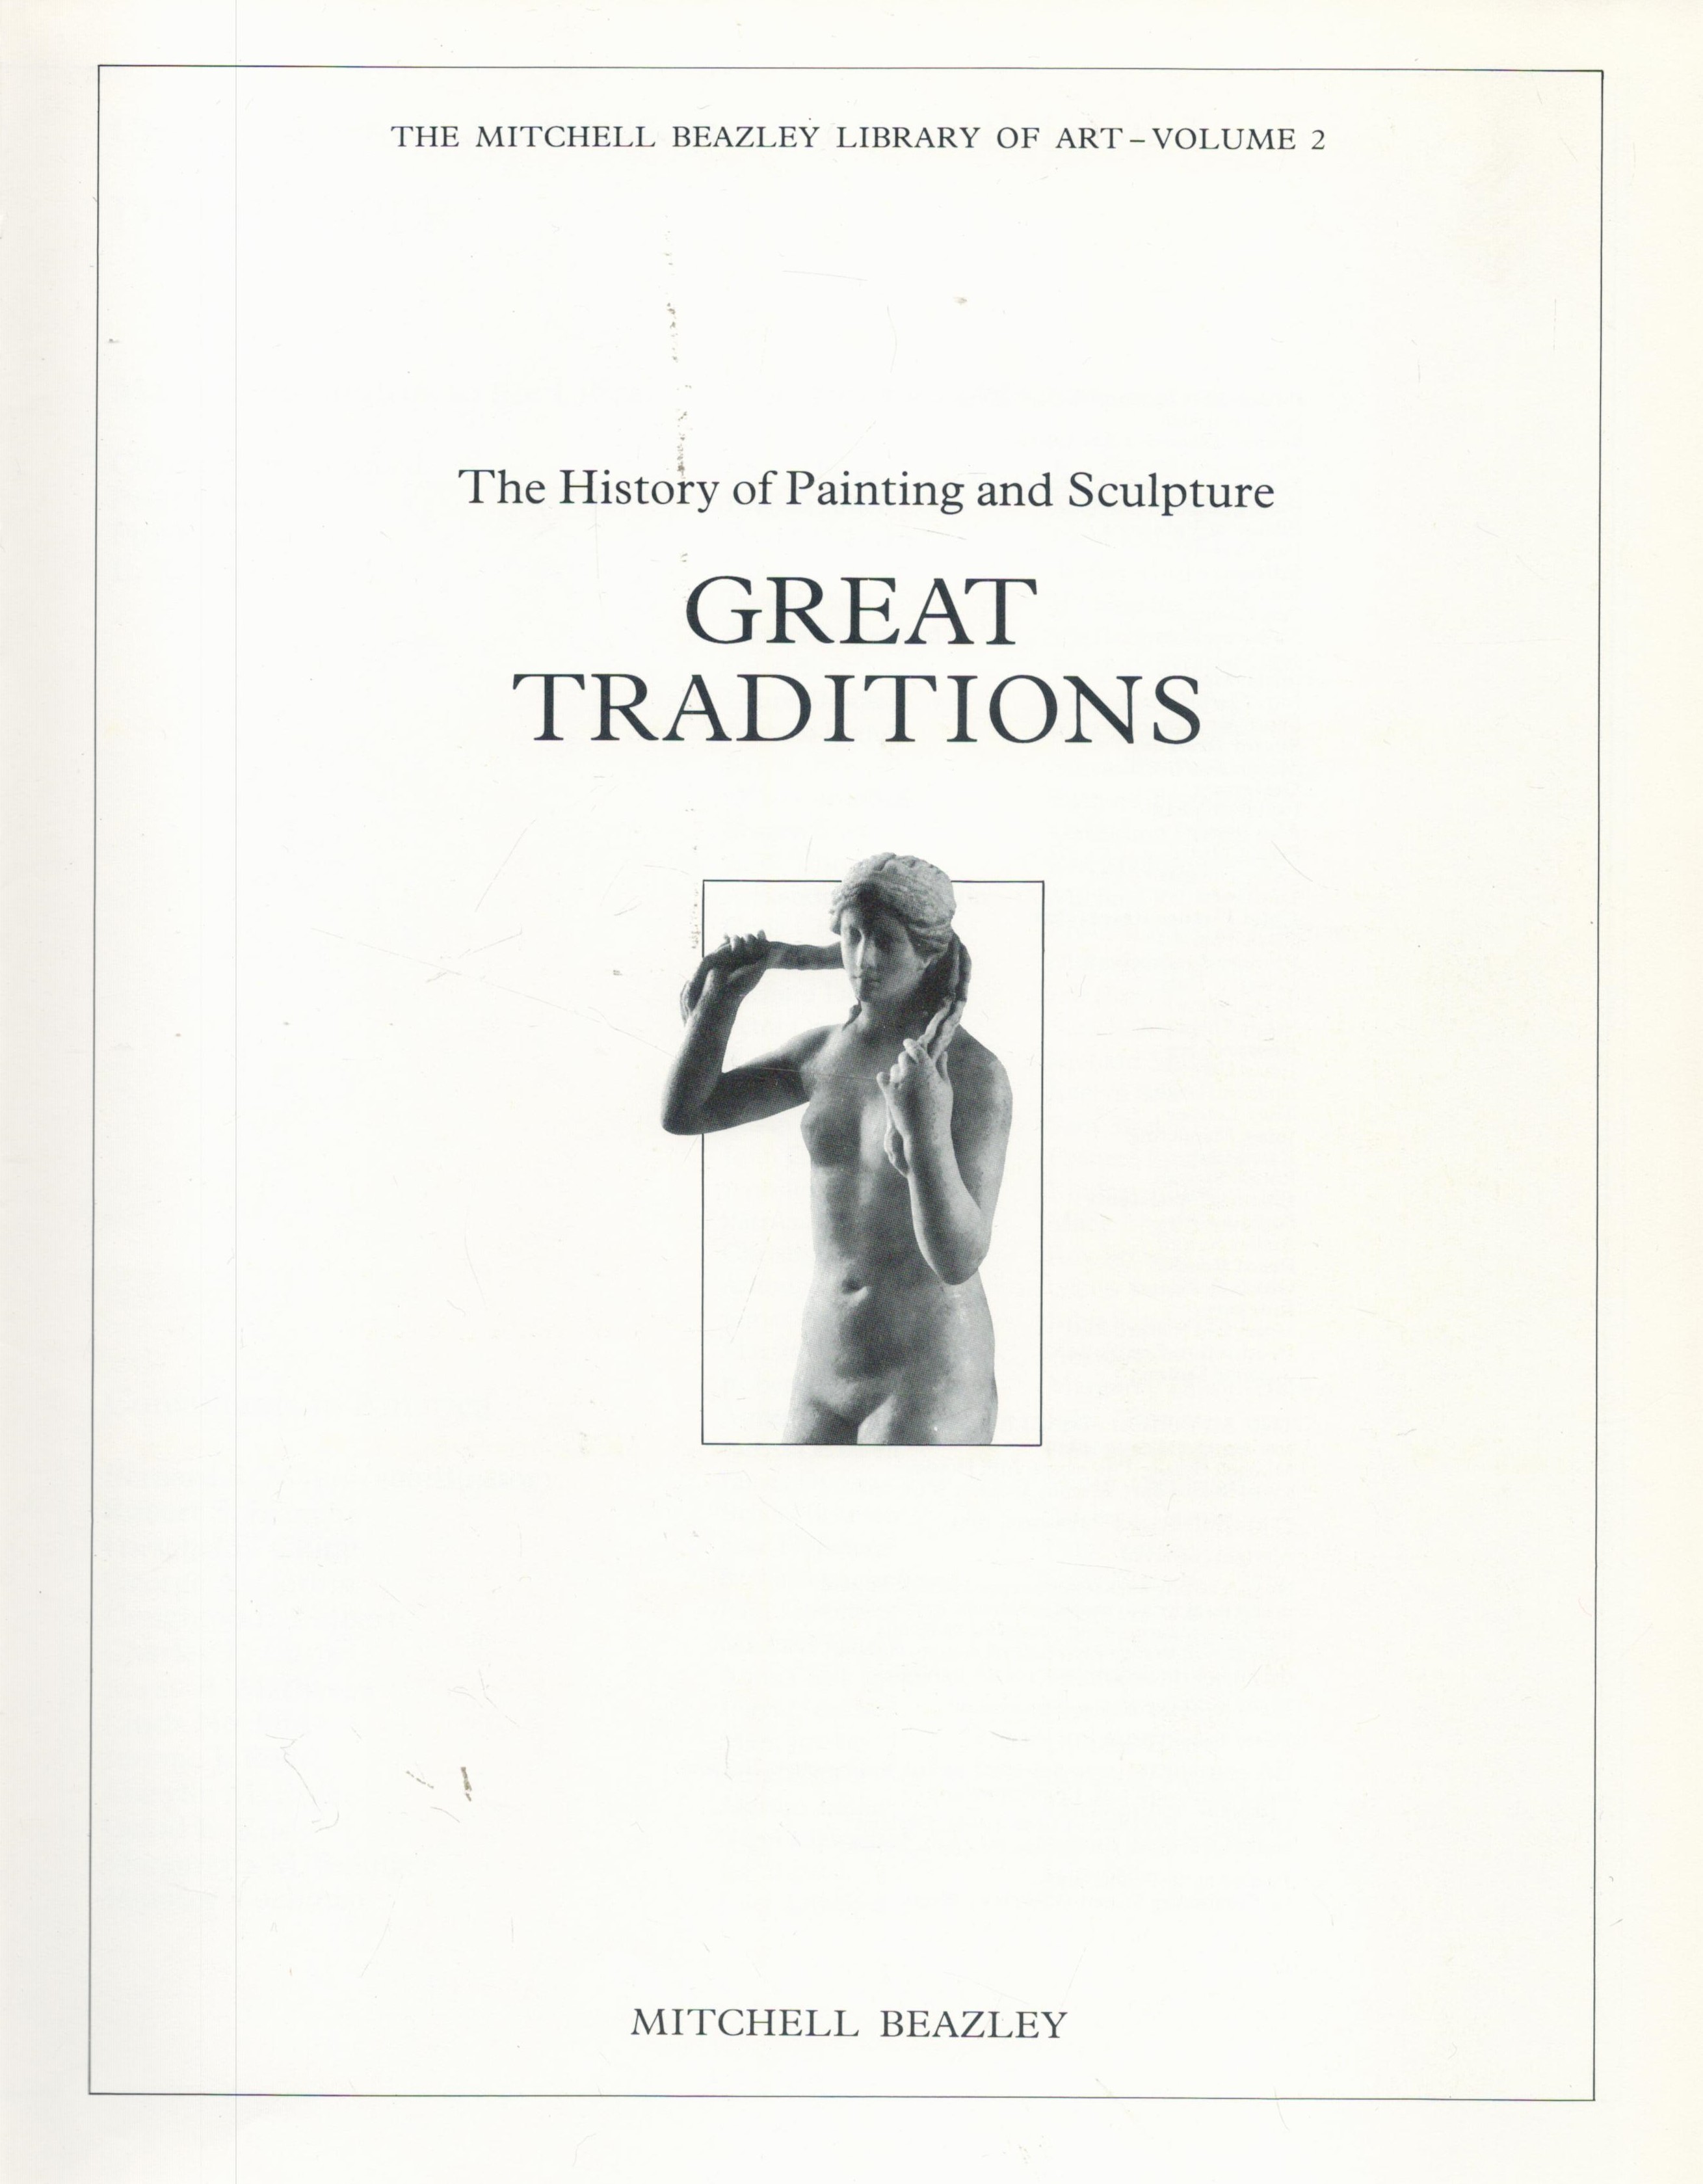 The History Of Painting And Sculpture Great Traditions 1981 First Edition Hardback Book with 272 - Image 2 of 3